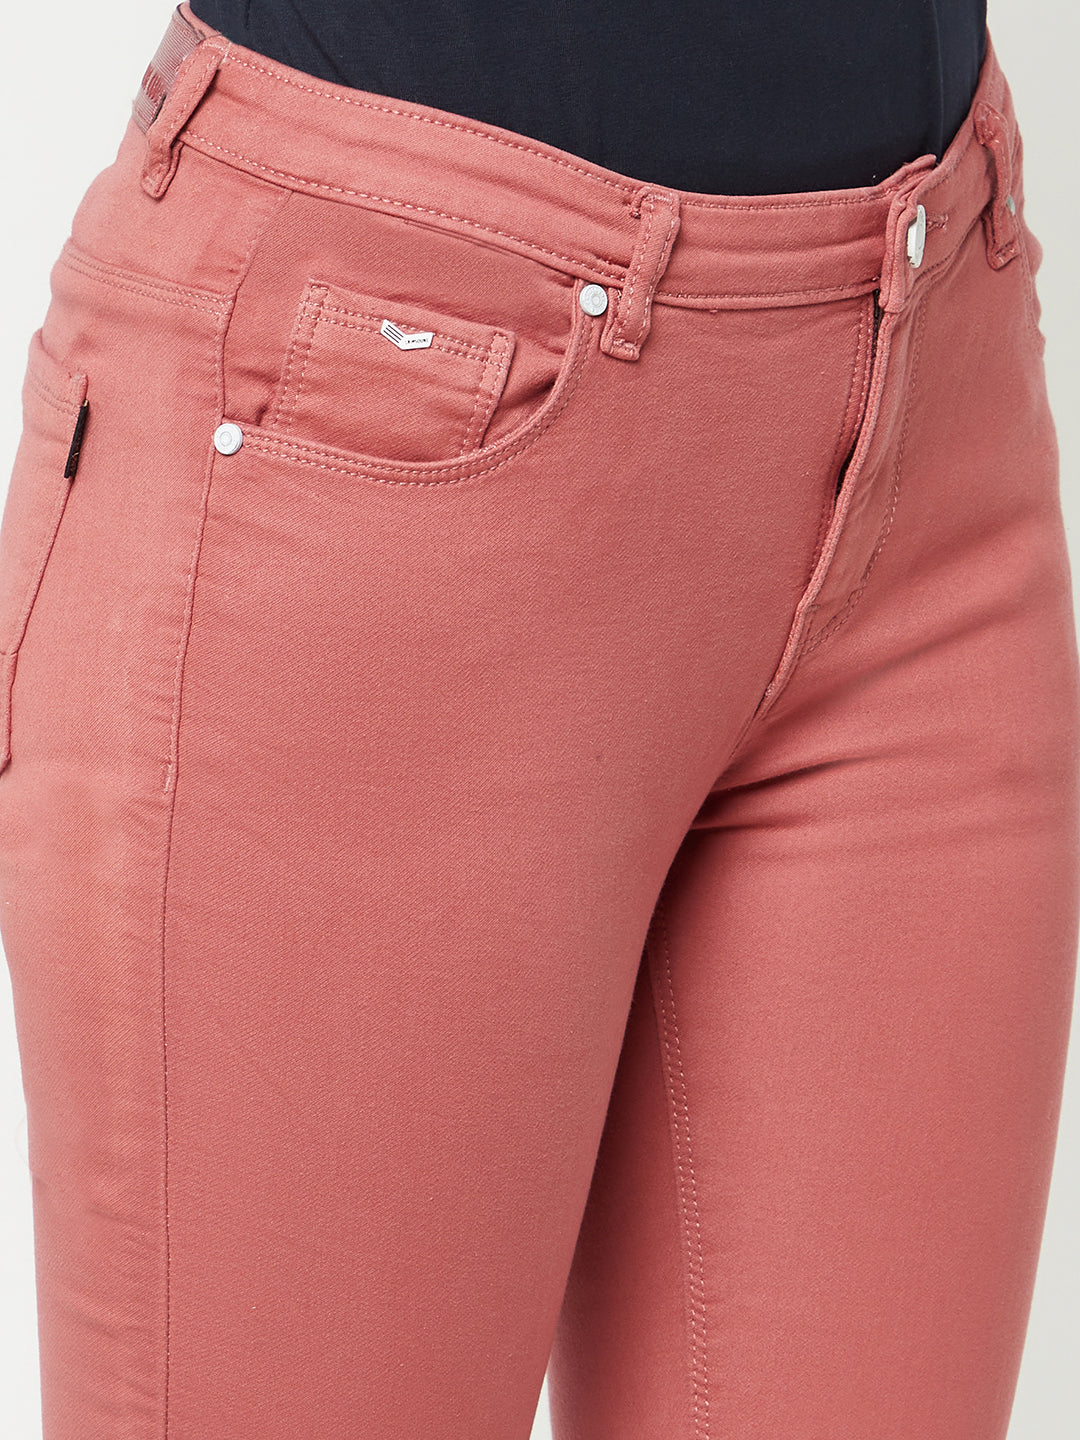  Pink Skinny Ankle Length Jeans